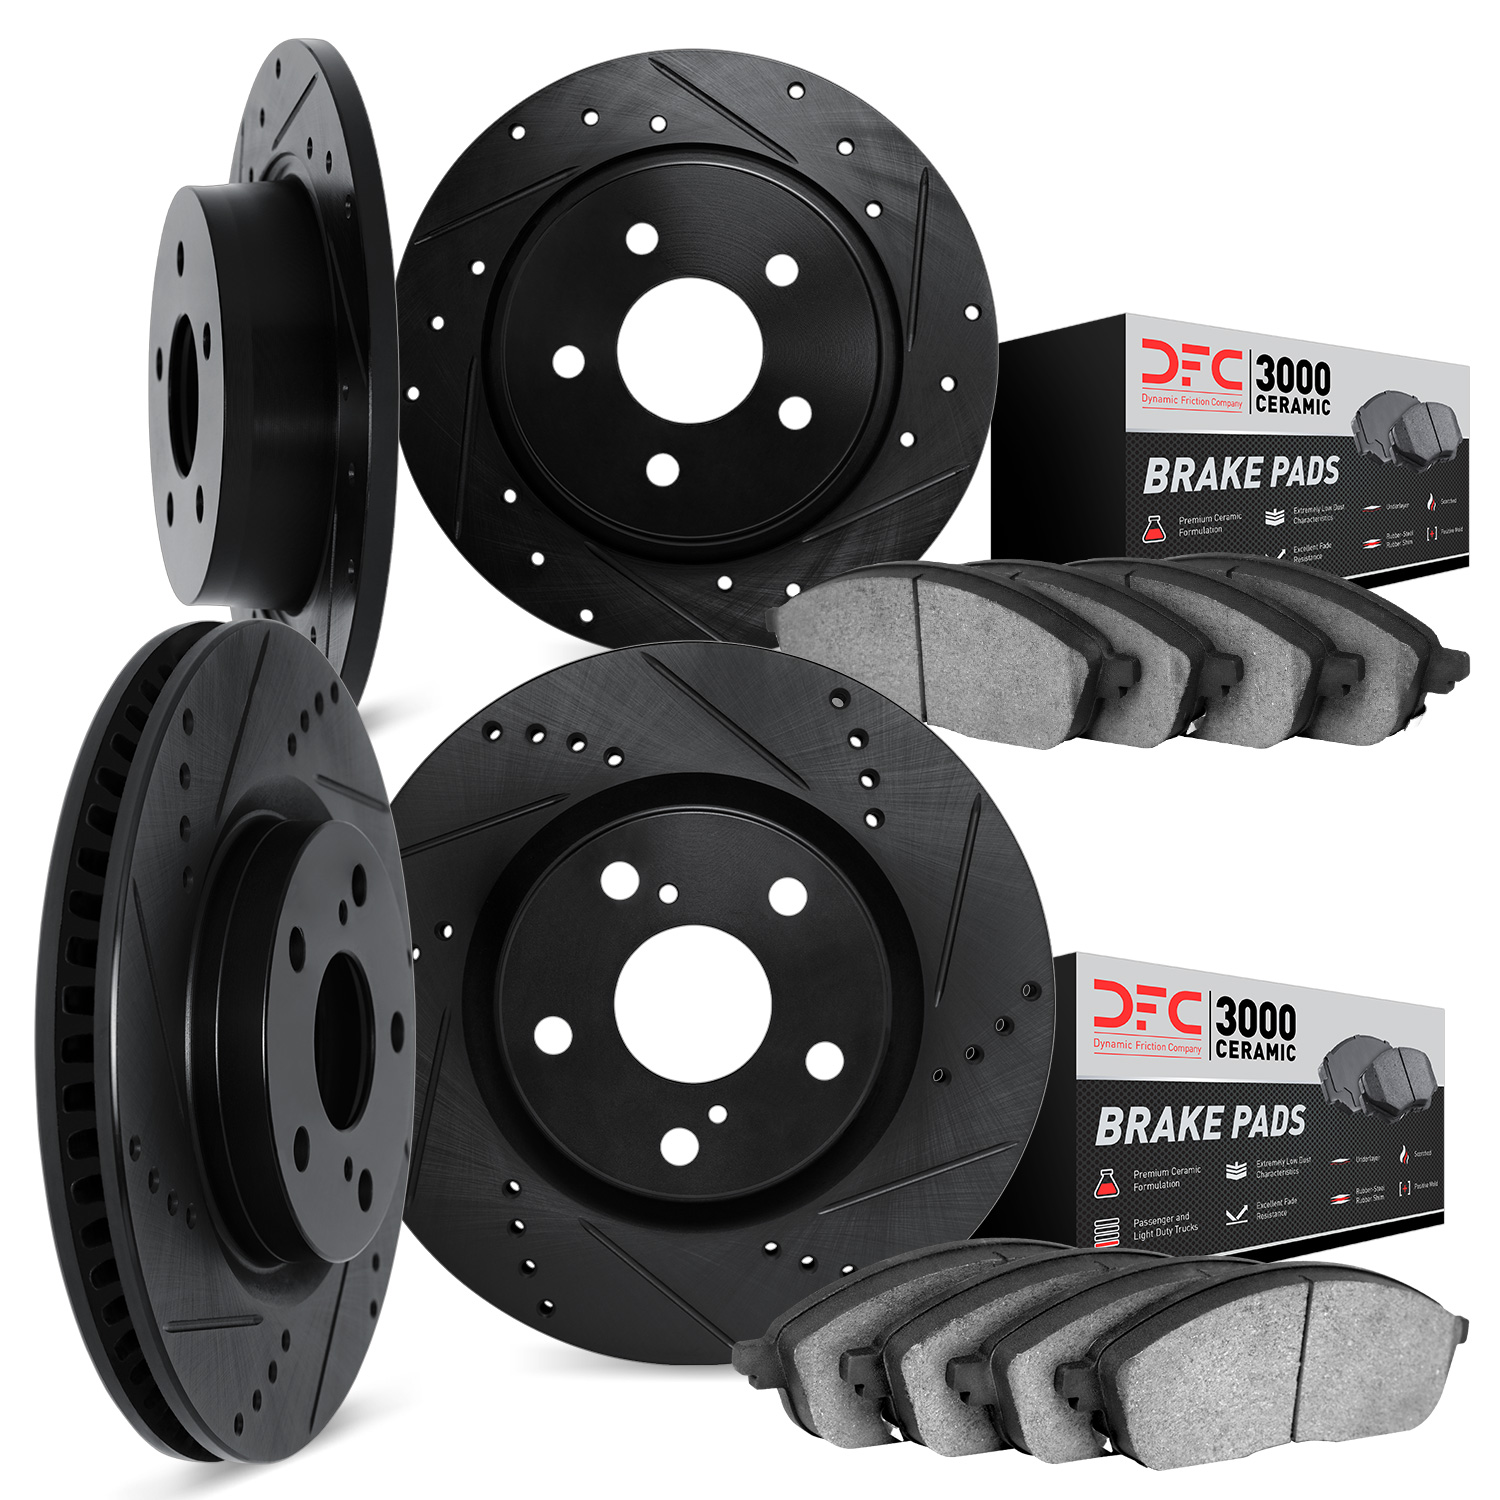 8304-13010 Drilled/Slotted Brake Rotors with 3000-Series Ceramic Brake Pads Kit [Black], 1998-2002 Subaru, Position: Front and R